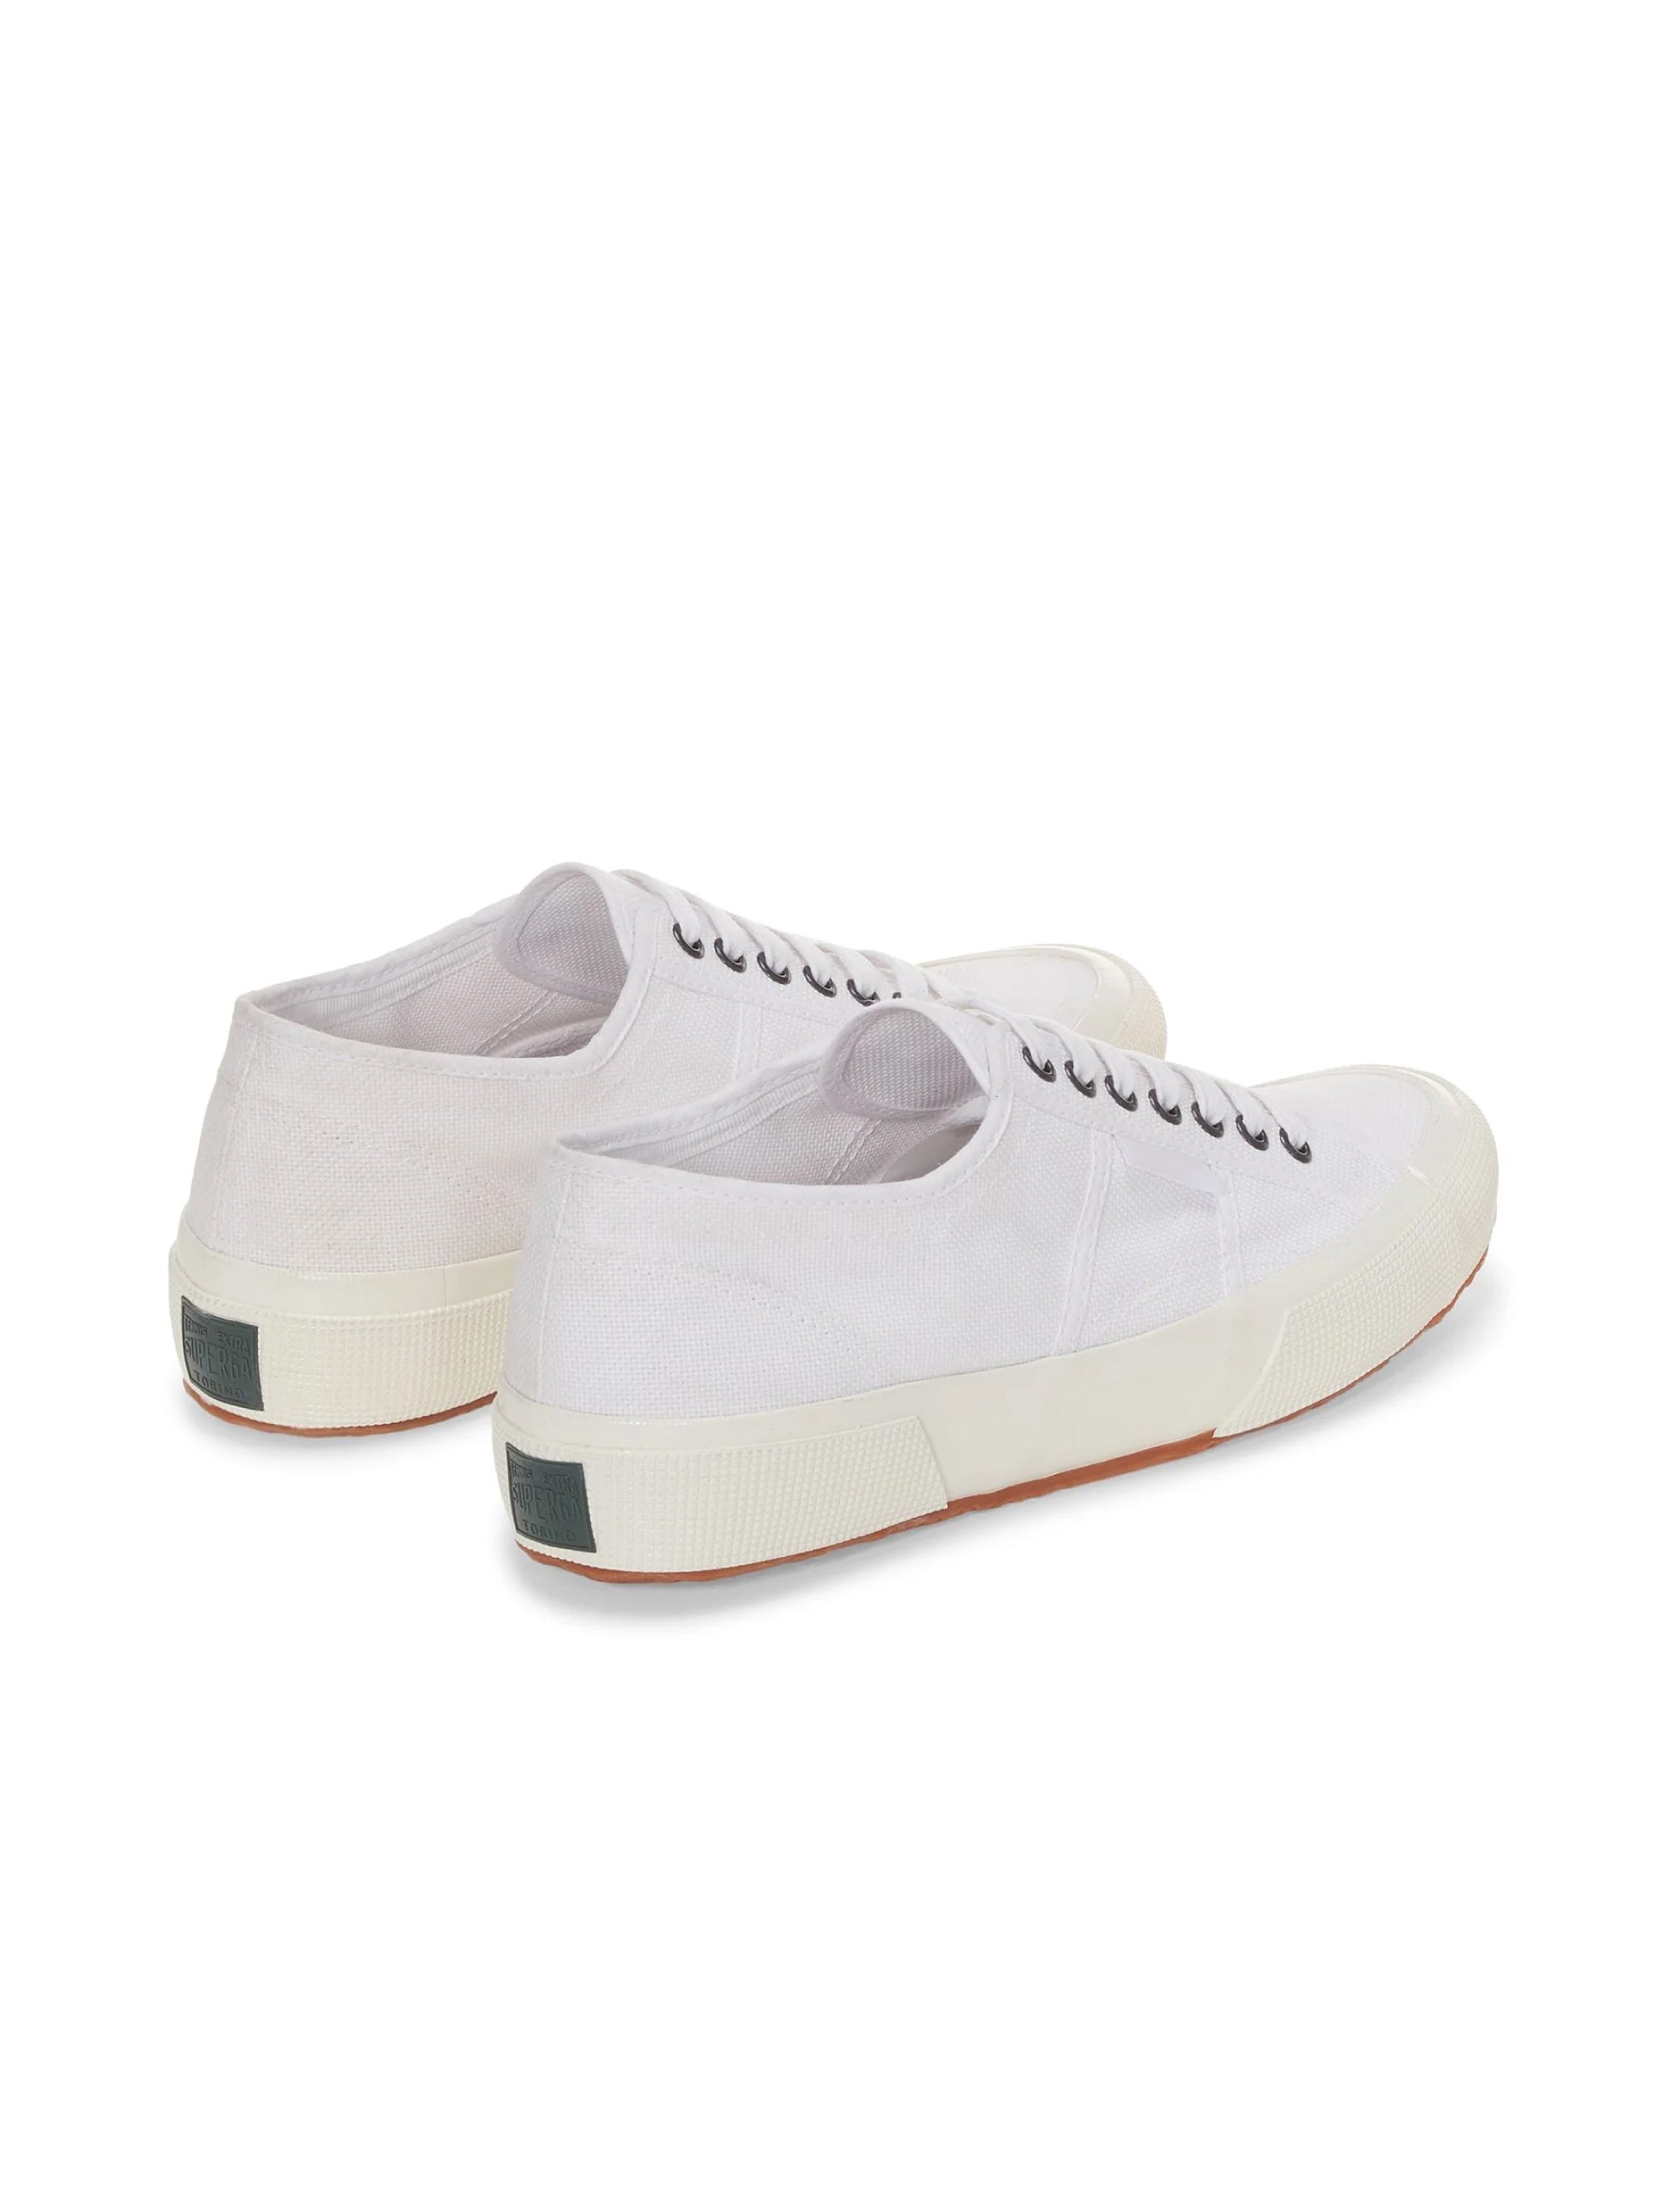 Archive Low Sneakers in White Cotton